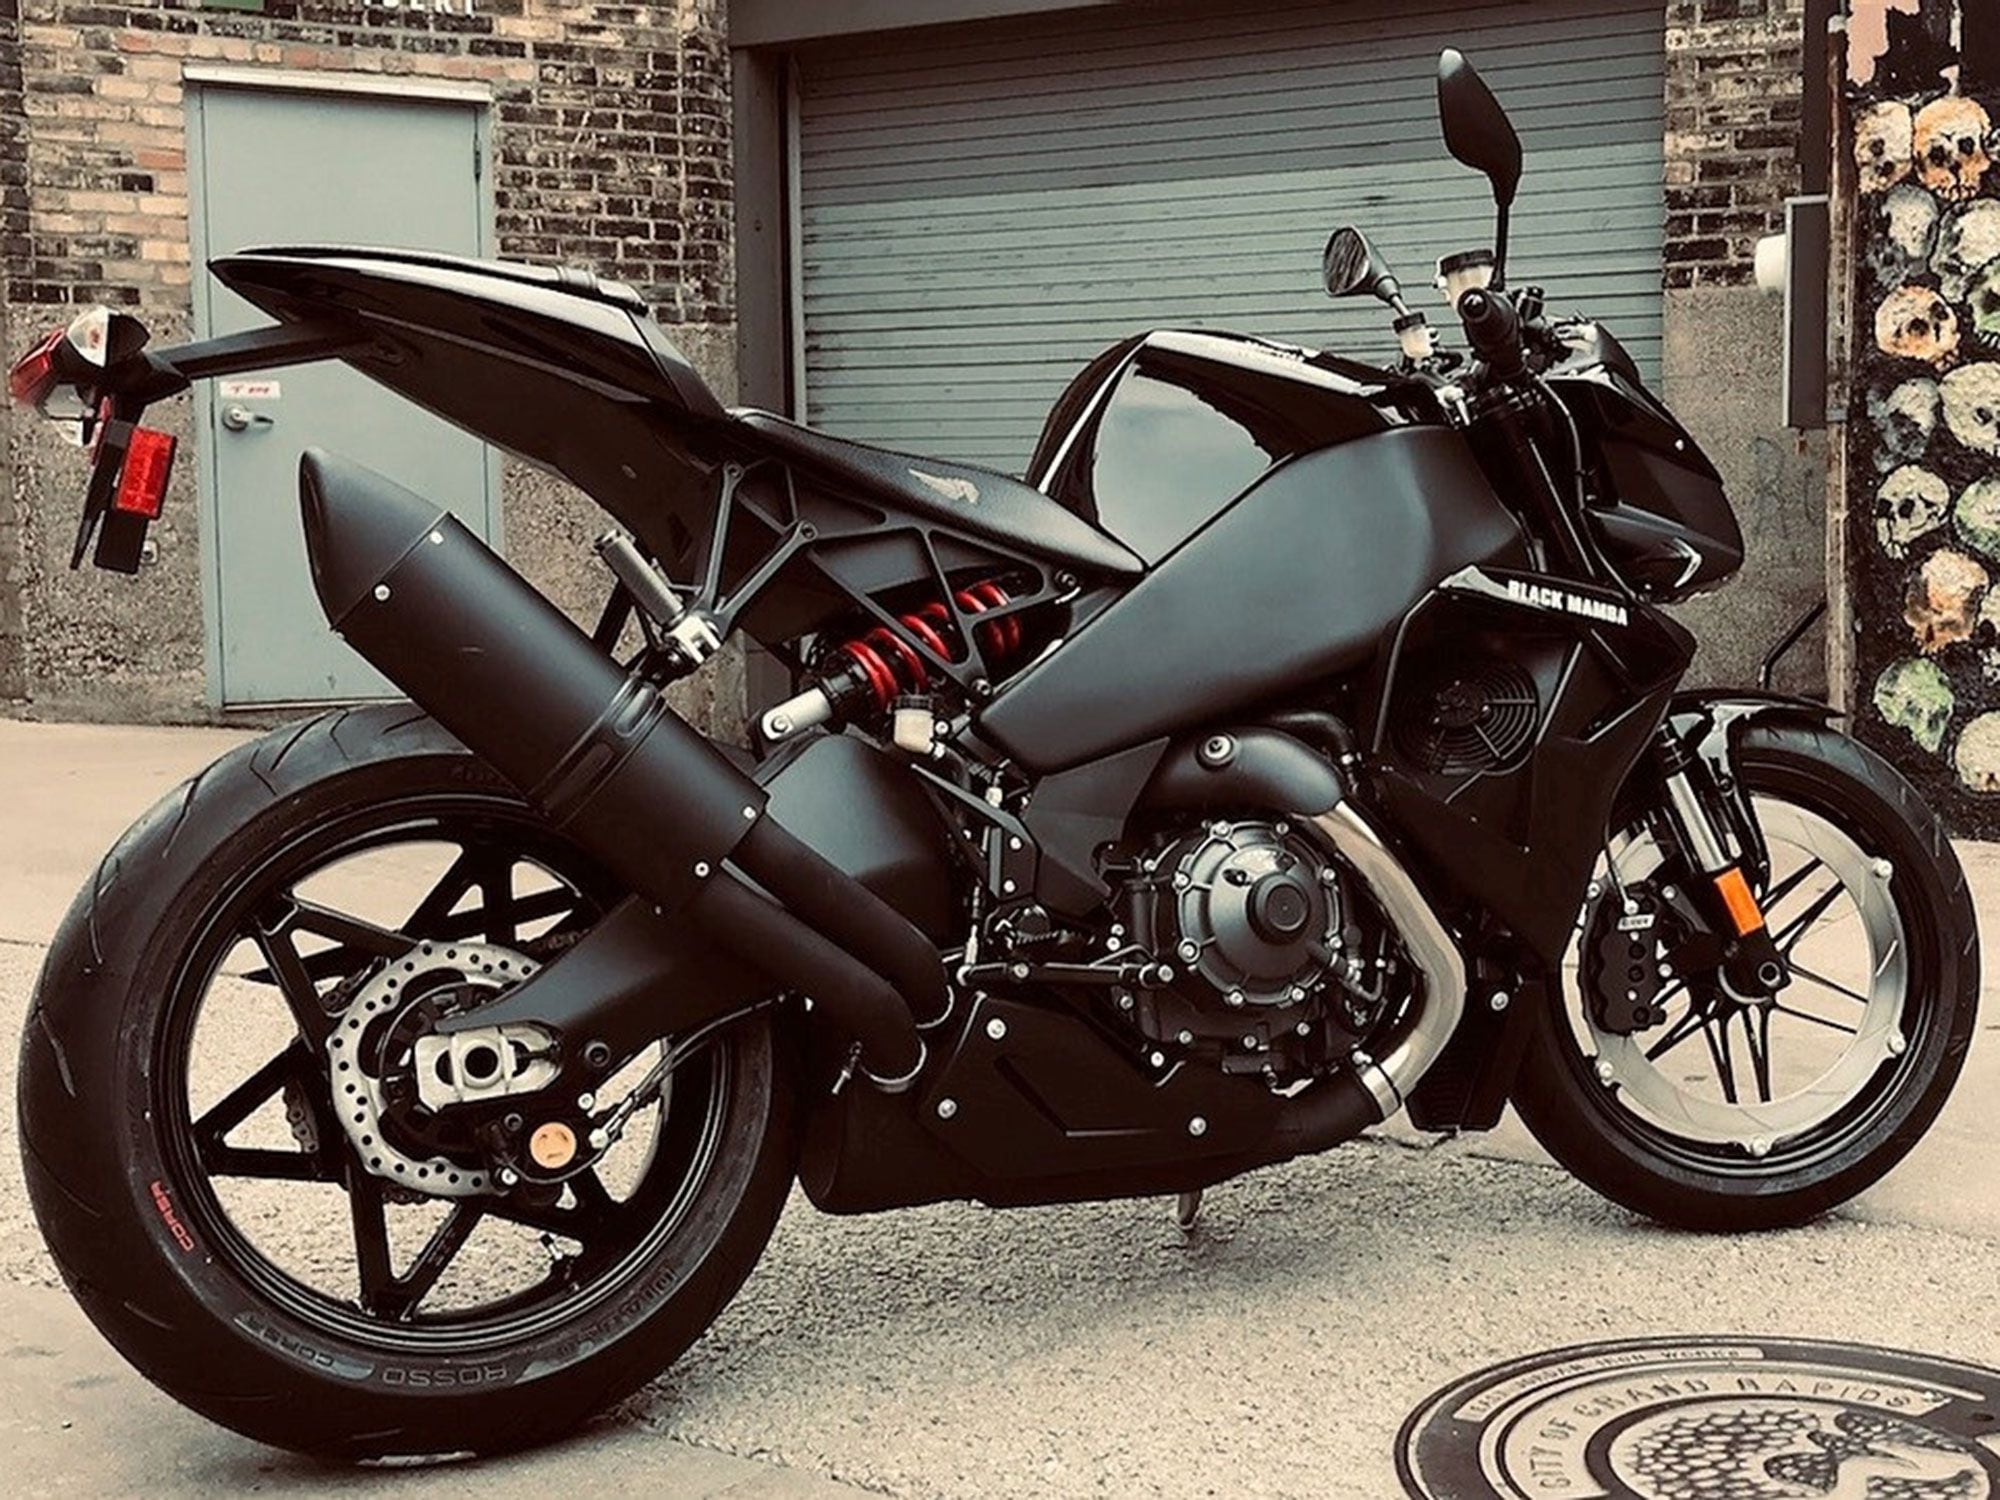 Buell has announced its return to the motorcycle world, and plans to produce 10 models, one being the EBR 1190SX.